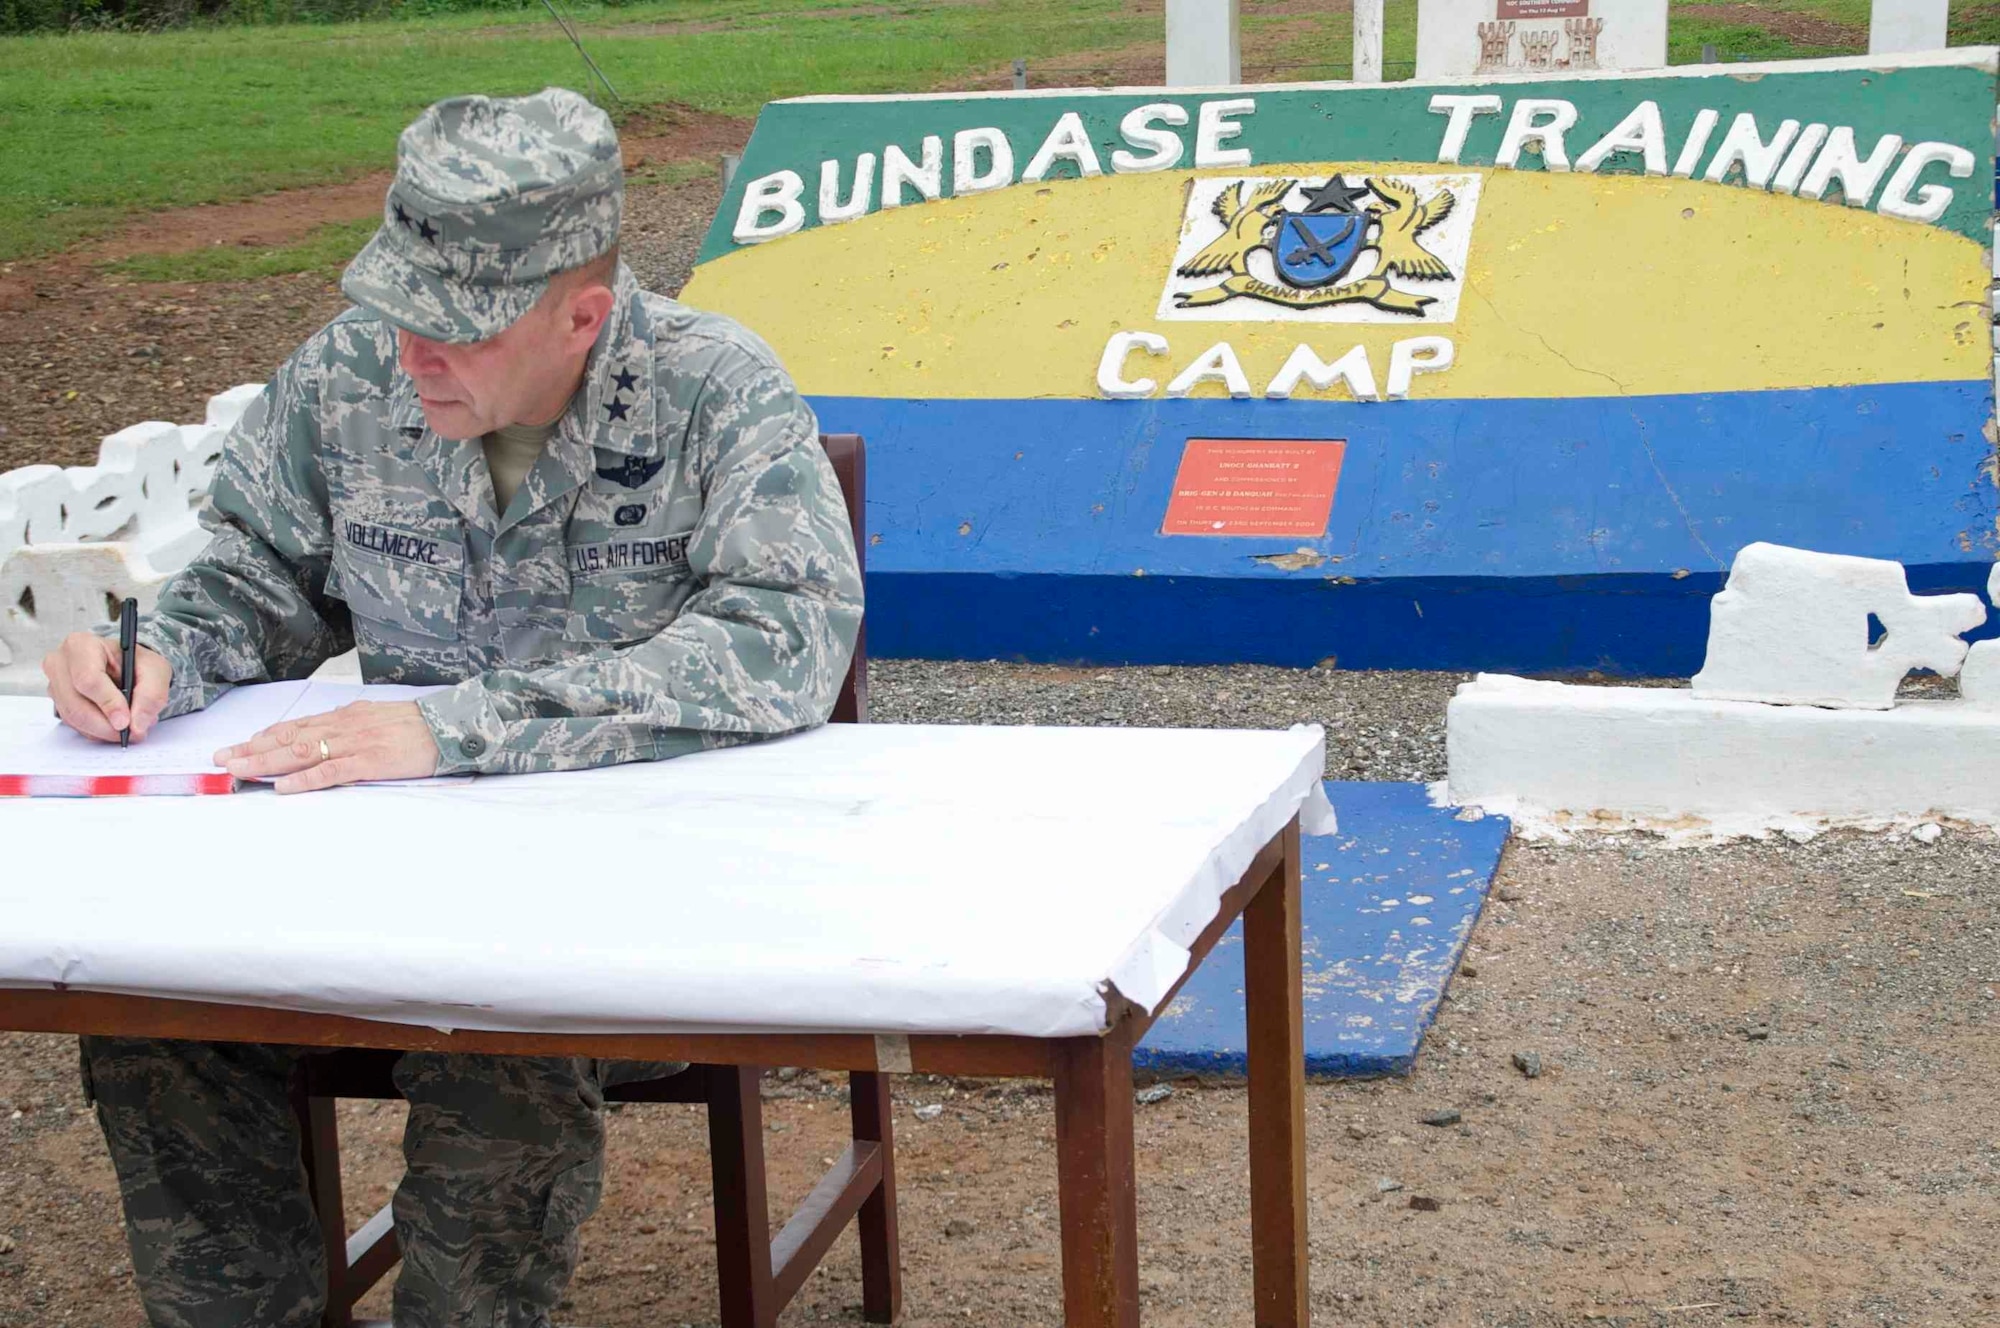 Maj. Gen. Eric Vollmecke, Western Accord 13 deputy exercise director, signs the distinguished visitors log while touring the Bundase training camp near Accra, Ghana, June 19. Western Accord 13 is a mutually beneficial exercise hosted by U.S. Army Africa that brings together the Economic Community of West African States and the US Army to have increased capabilities to support regional peacekeeping operations. (Photos by: Sgt. Tyler Sletten, 116th Public Affairs Detachment)